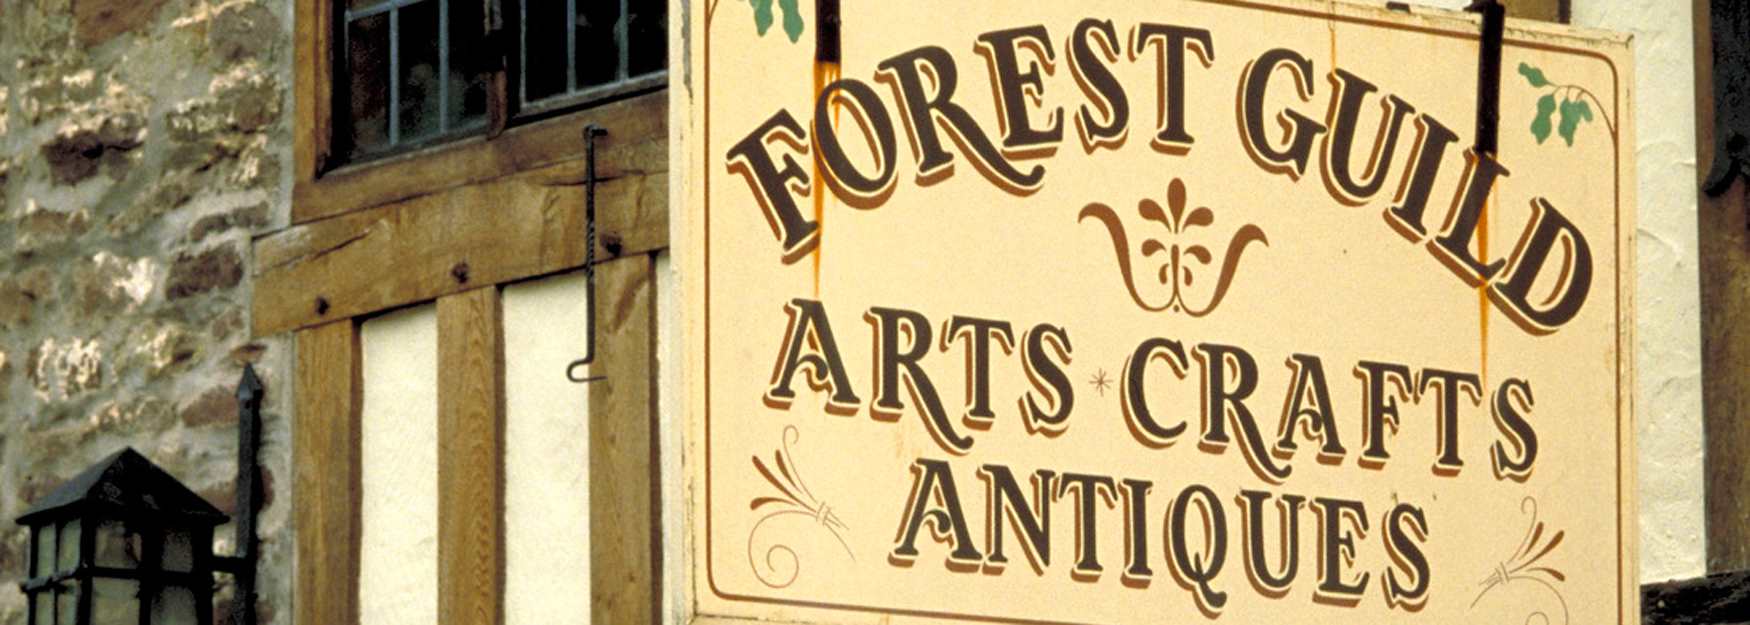 Arts, crafts and antiques